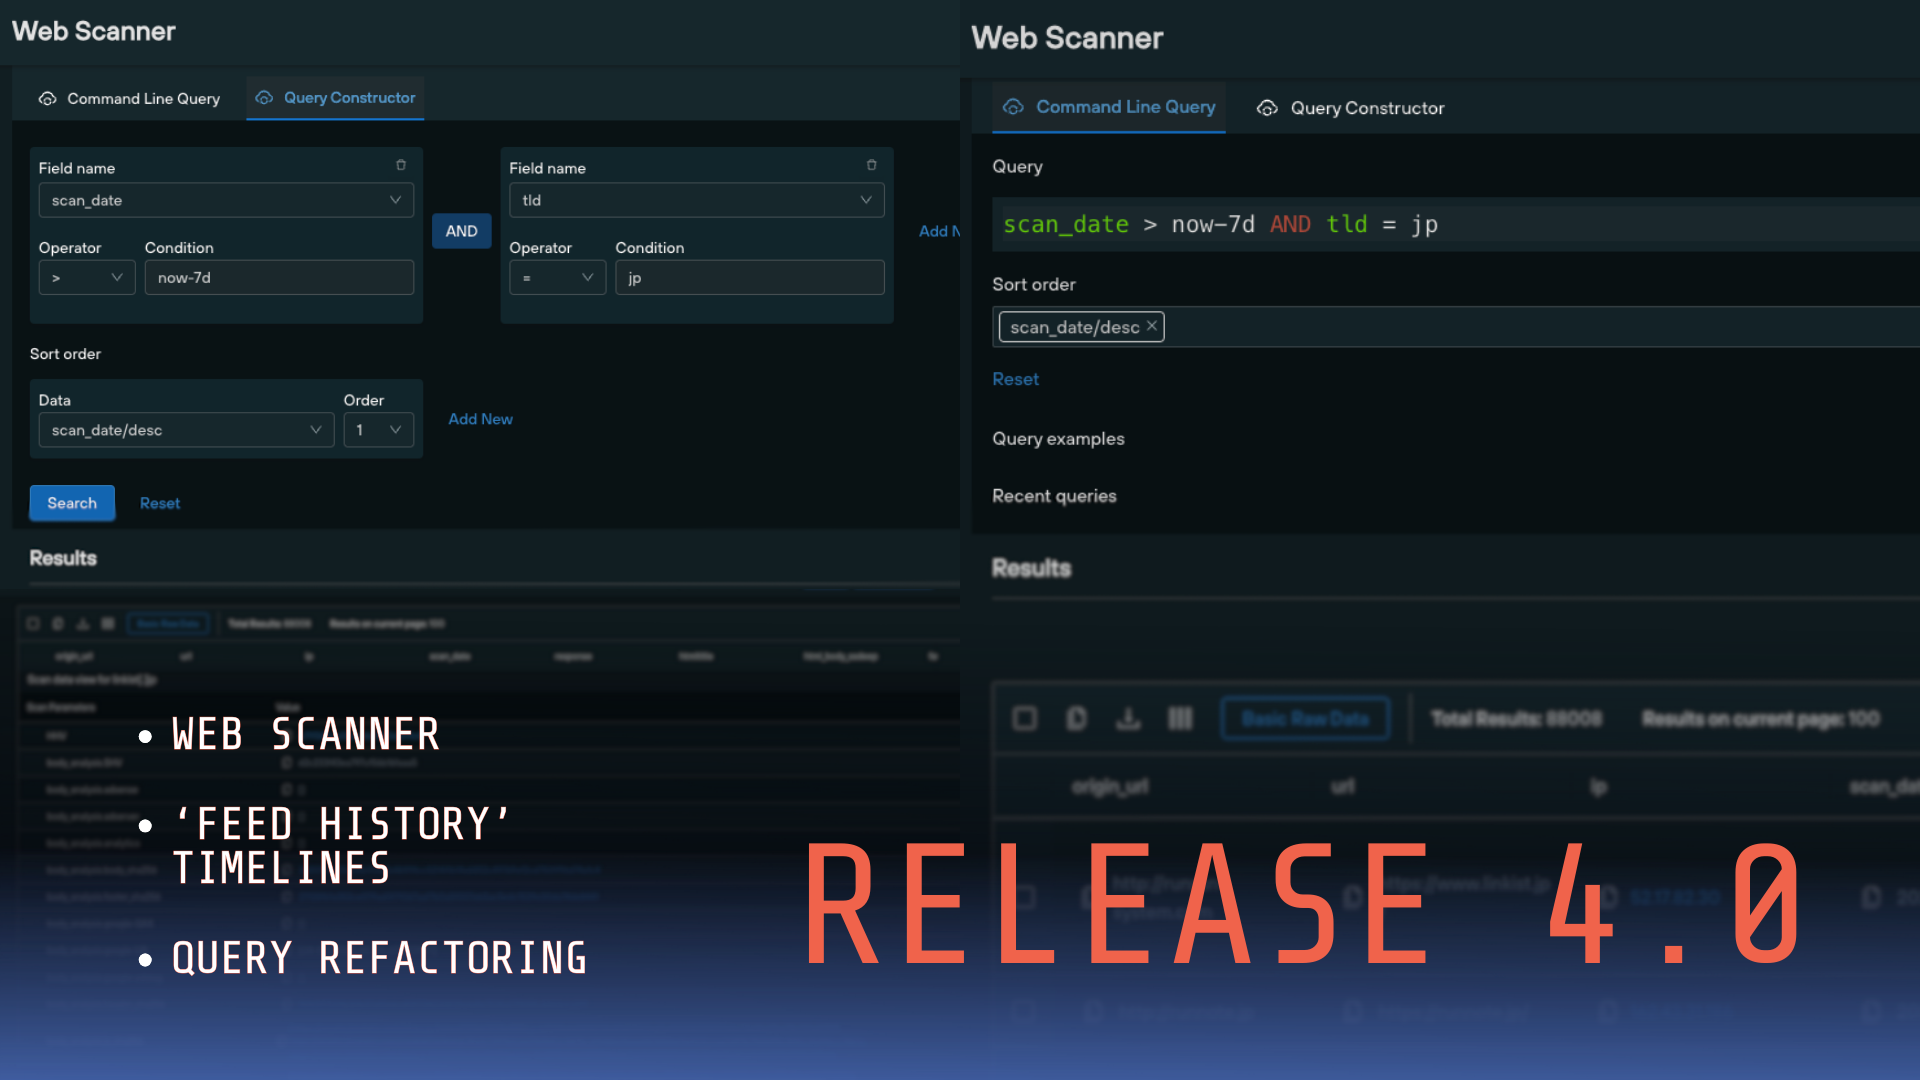 Release 4.0